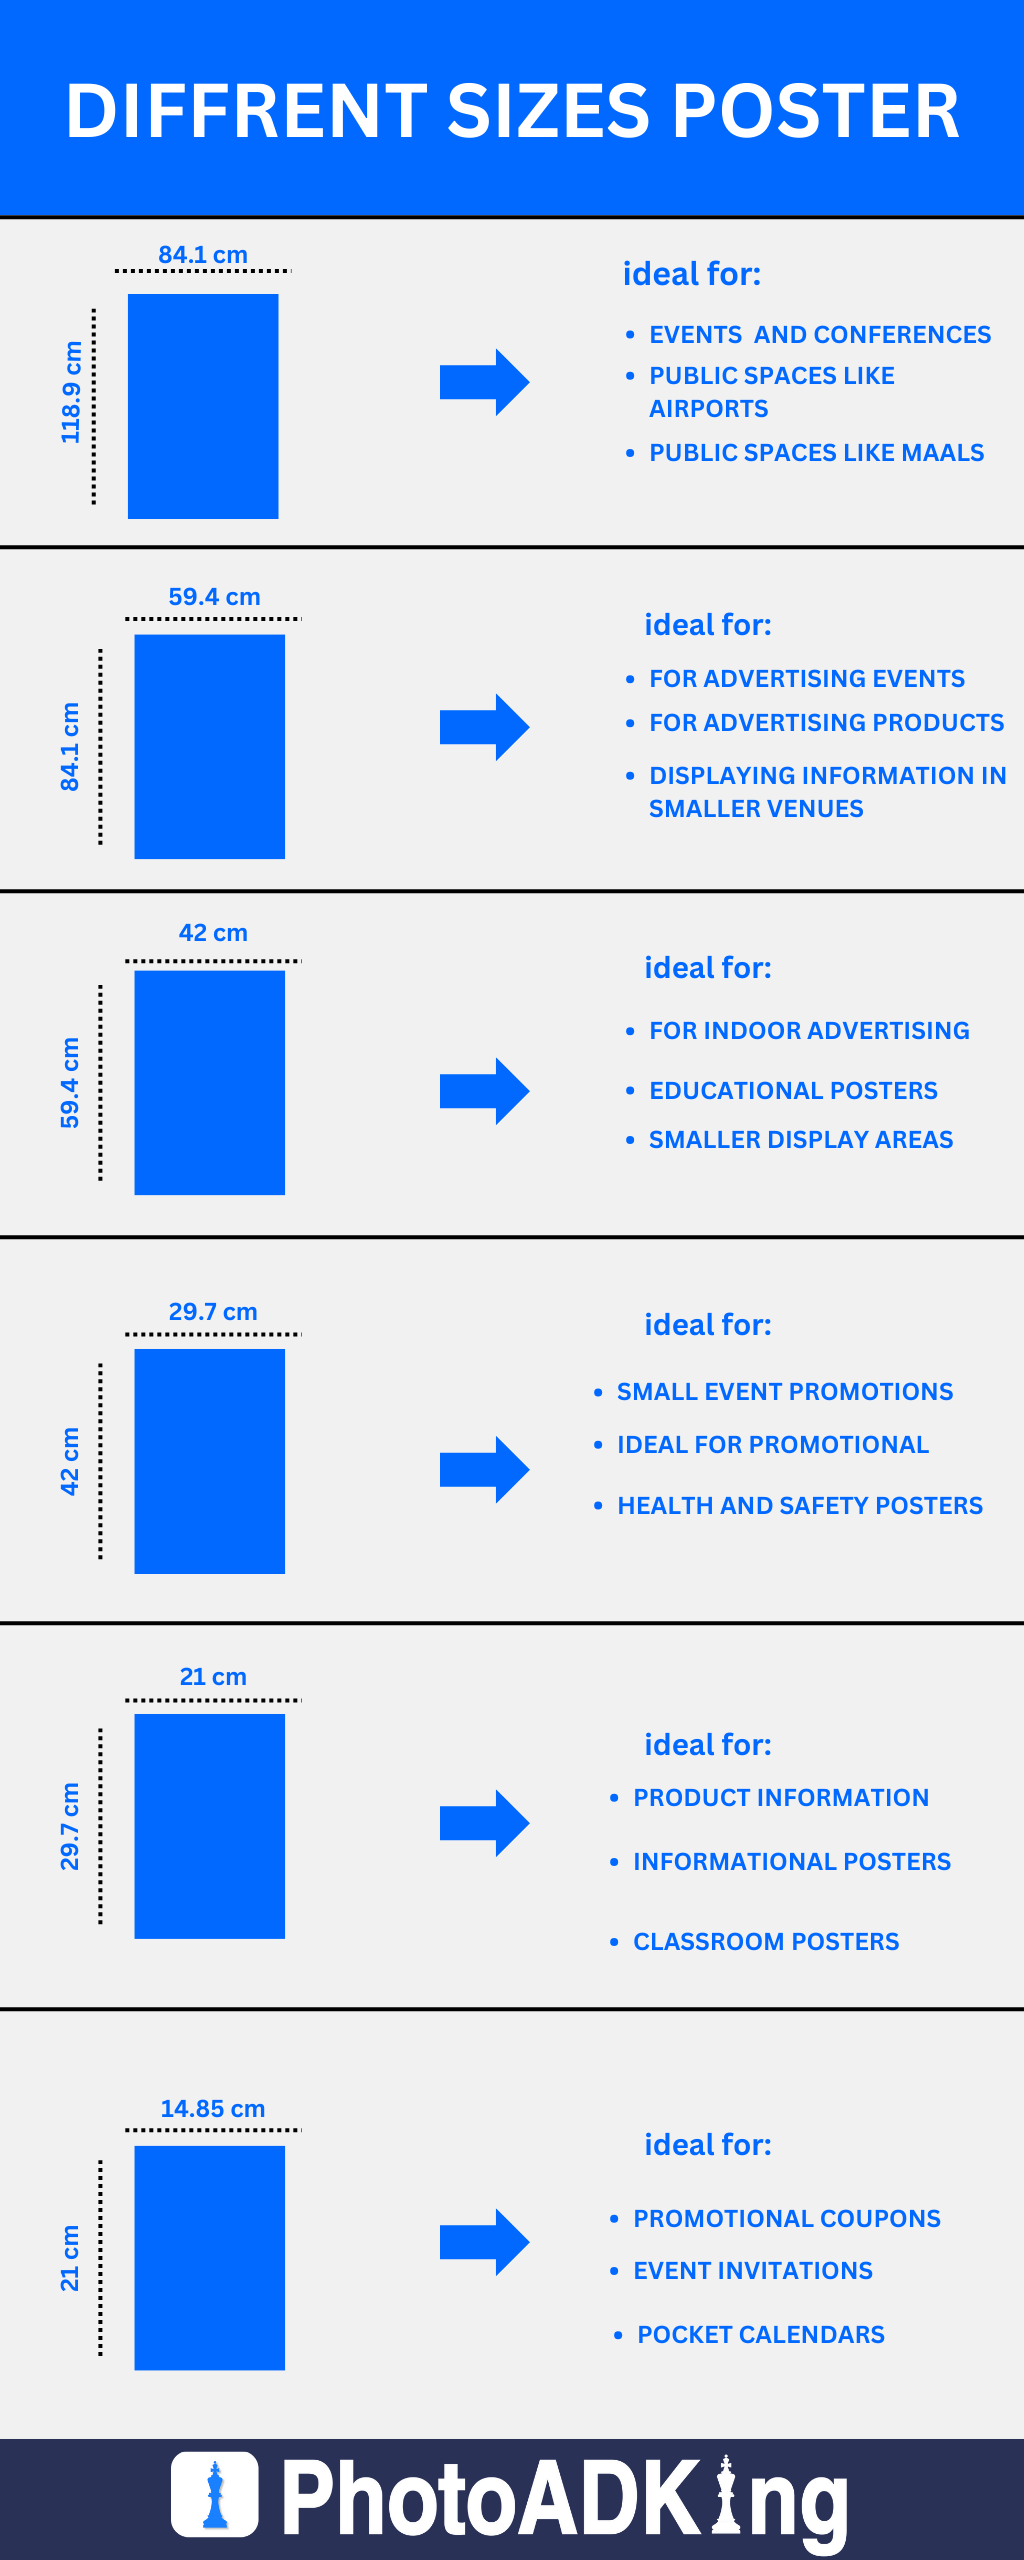 Different Poster Sizes and Dimensions